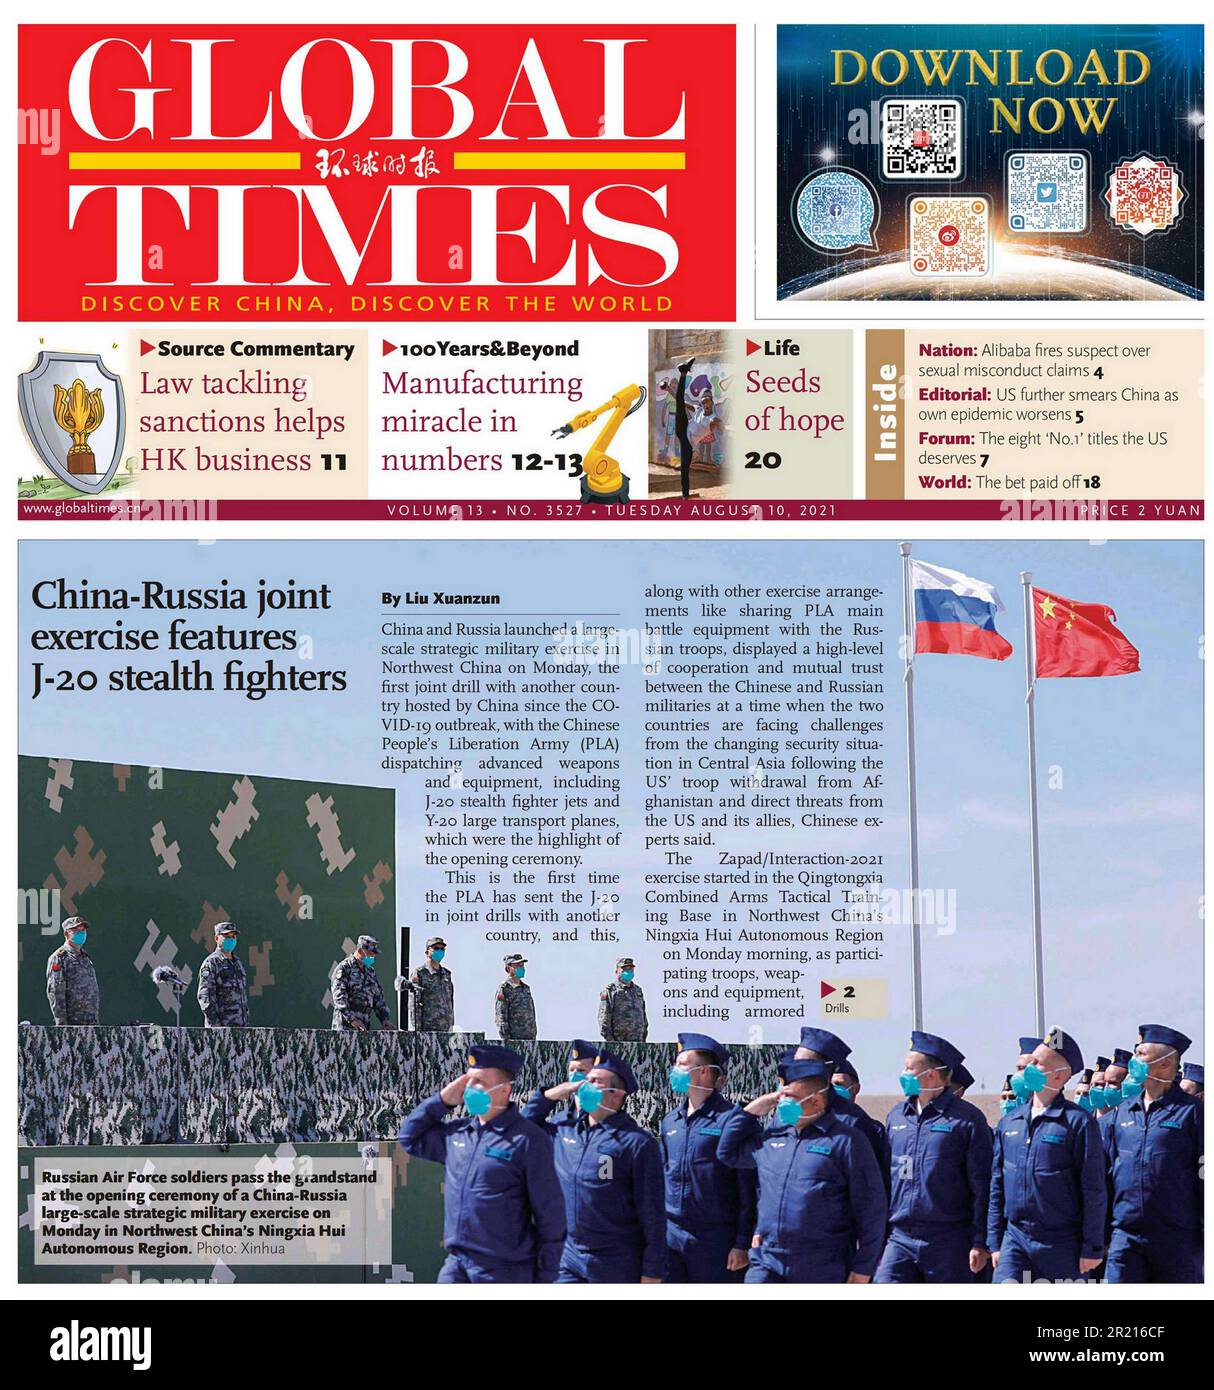 Global Times (Chinese newspaper), front page describing joint Russian and Chinese military excercises. Stock Photo